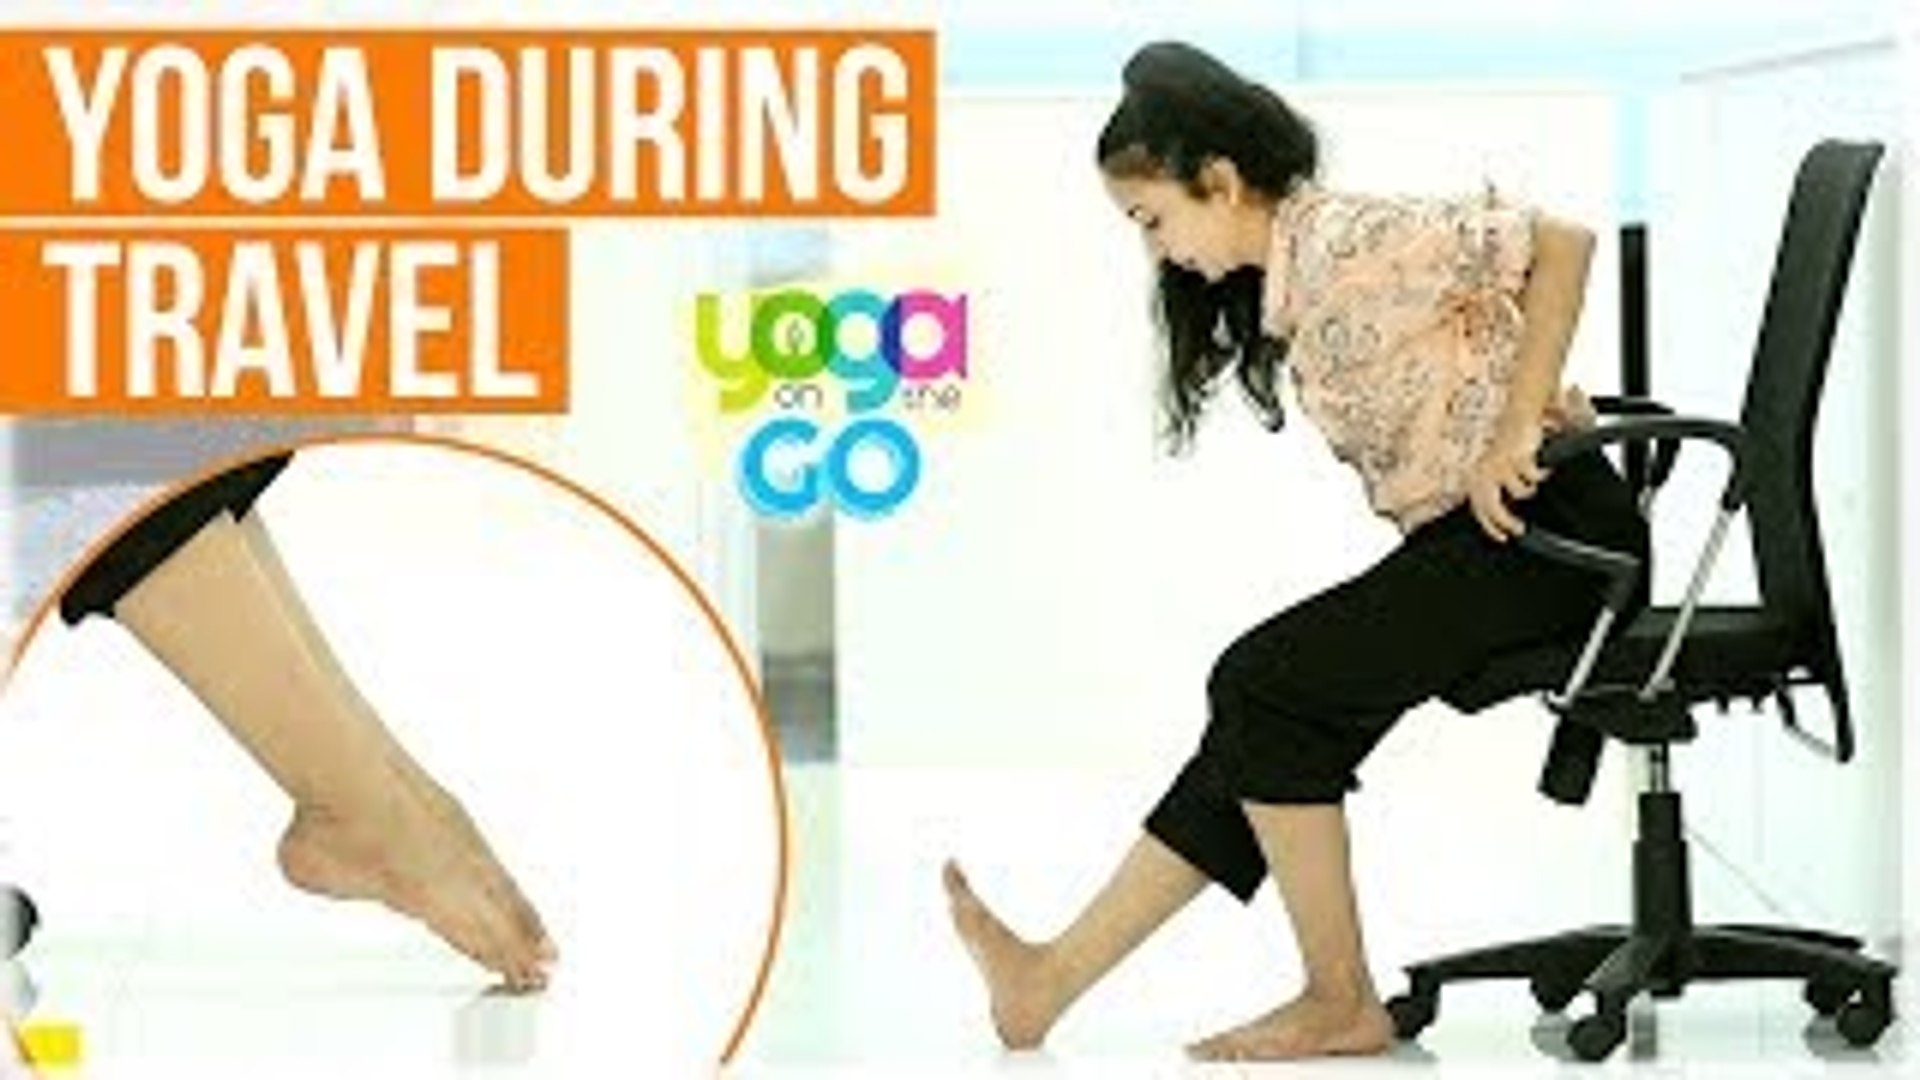 Yoga For Travel | Yoga For Long Trips | Yoga During Travel | Travel Yoga Video | Yoga On The Go